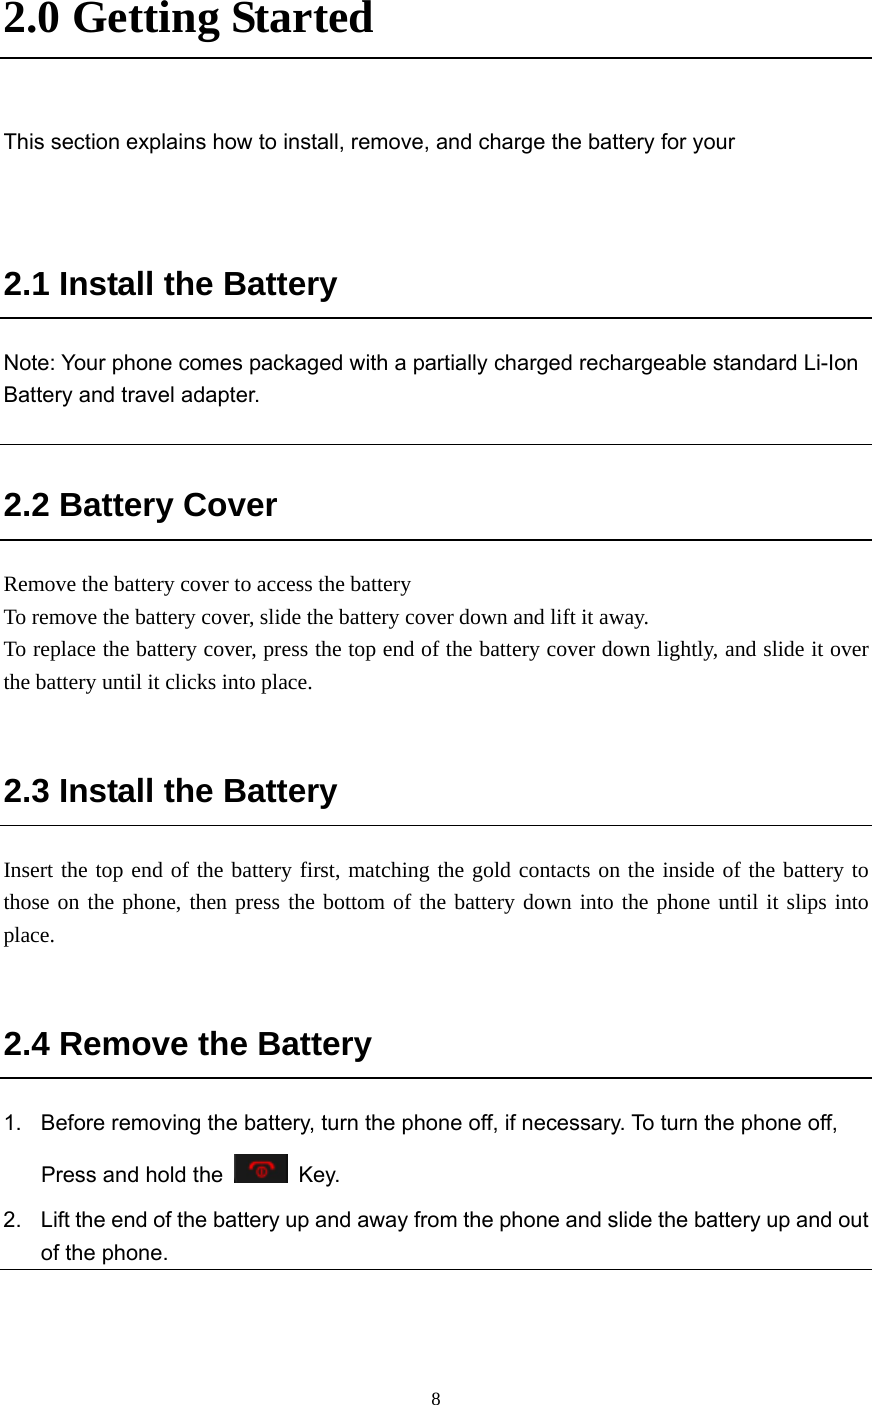  8 2.0 Getting Started    This section explains how to install, remove, and charge the battery for your     2.1 Install the Battery Note: Your phone comes packaged with a partially charged rechargeable standard Li-Ion Battery and travel adapter.  2.2 Battery Cover Remove the battery cover to access the battery To remove the battery cover, slide the battery cover down and lift it away. To replace the battery cover, press the top end of the battery cover down lightly, and slide it over the battery until it clicks into place.   2.3 Install the Battery Insert the top end of the battery first, matching the gold contacts on the inside of the battery to those on the phone, then press the bottom of the battery down into the phone until it slips into place.  2.4 Remove the Battery 1.  Before removing the battery, turn the phone off, if necessary. To turn the phone off, Press and hold the   Key. 2.  Lift the end of the battery up and away from the phone and slide the battery up and out of the phone. 